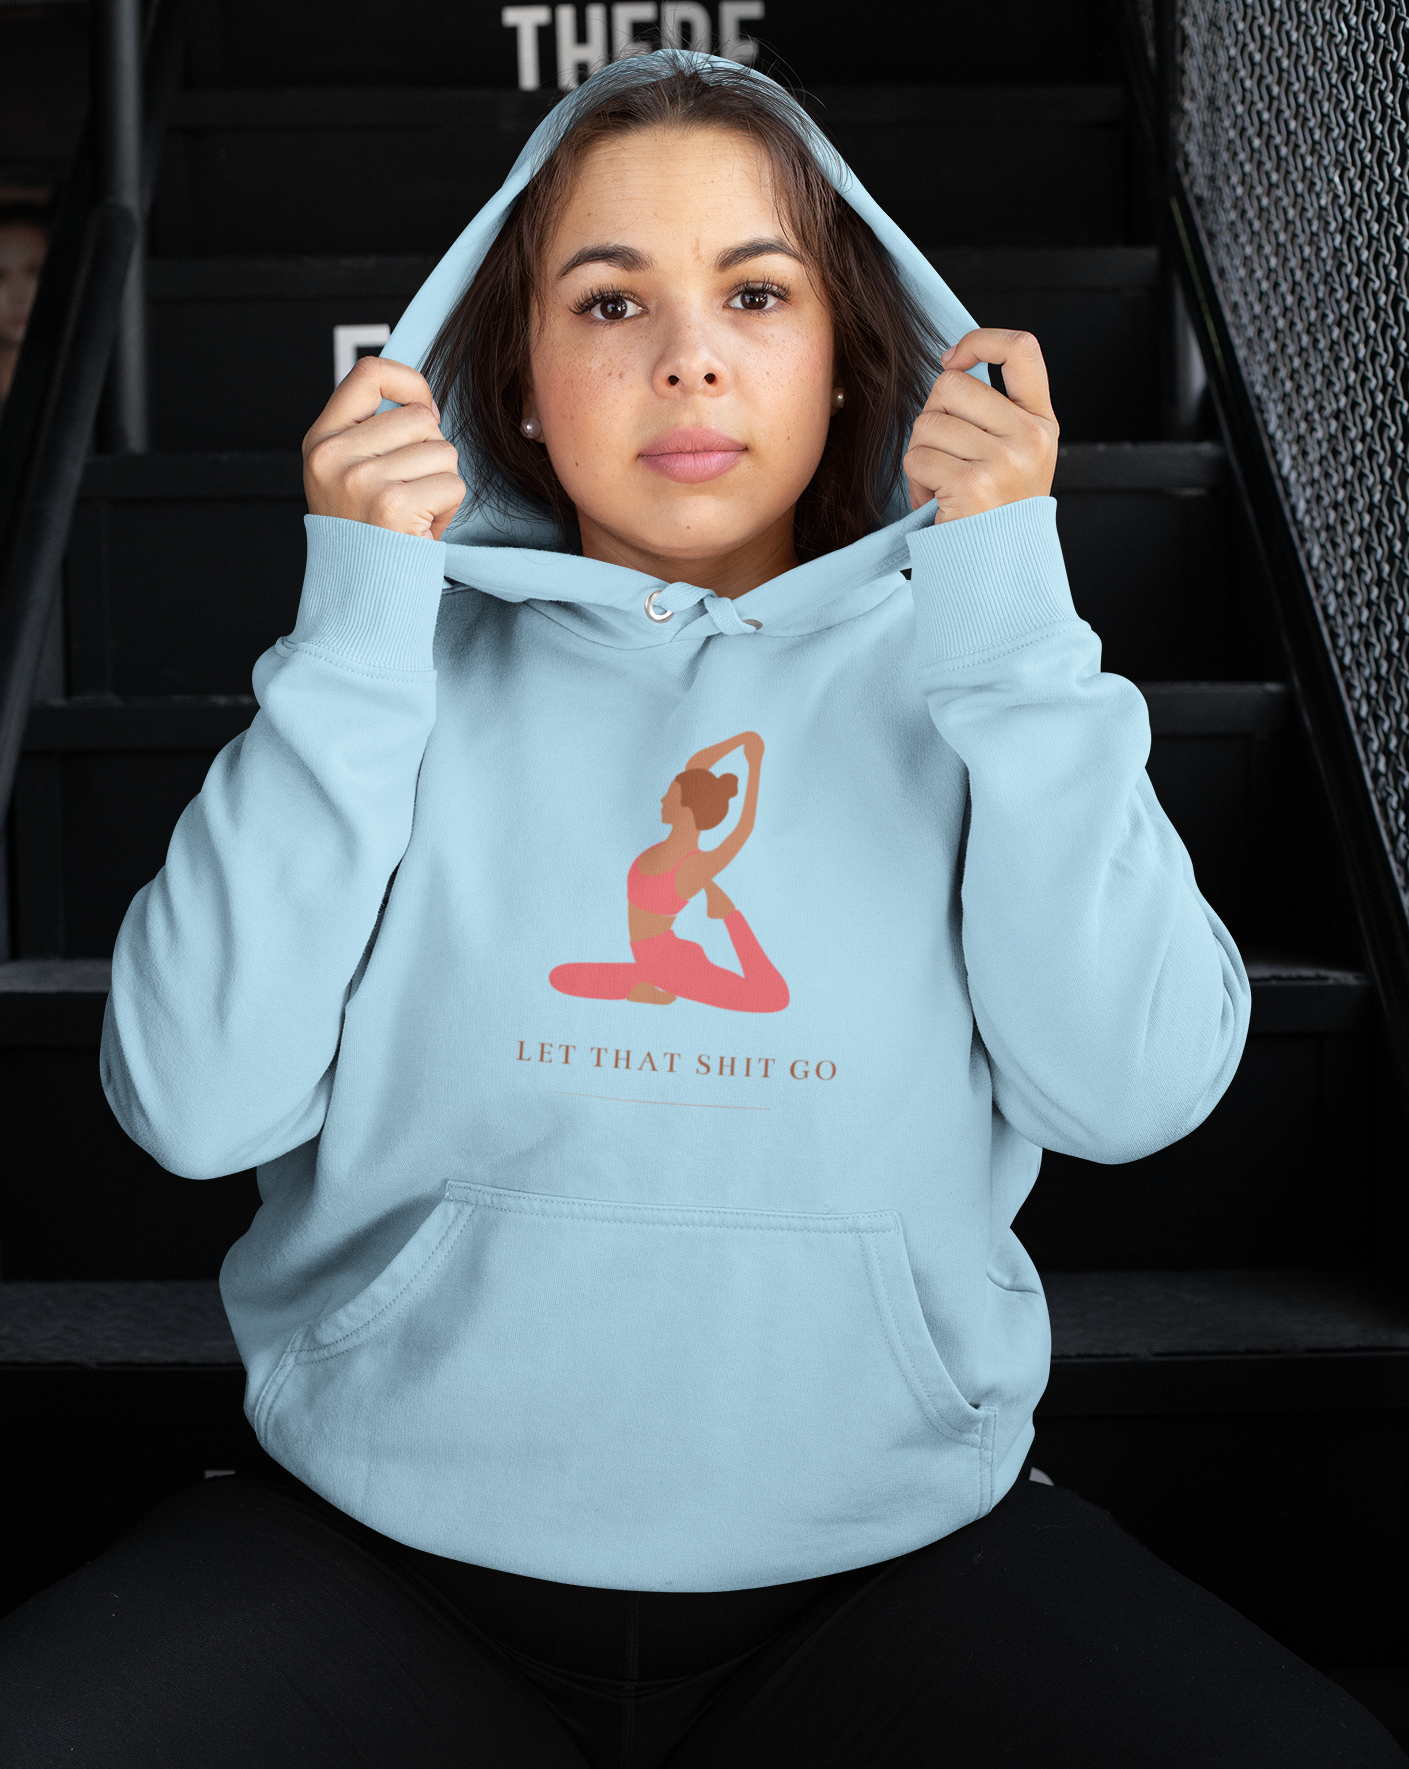 Take a deep breath in and out. This yoga inspired hoodie sweatshirt is designed with the phrase “Let That Shit Go”. Manifest all good things coming to you in the future with this stylish piece. Wear it with your favorite pair of leggings and feel all the good vibes. Made with a plush cotton, it is like wearing a blanket.